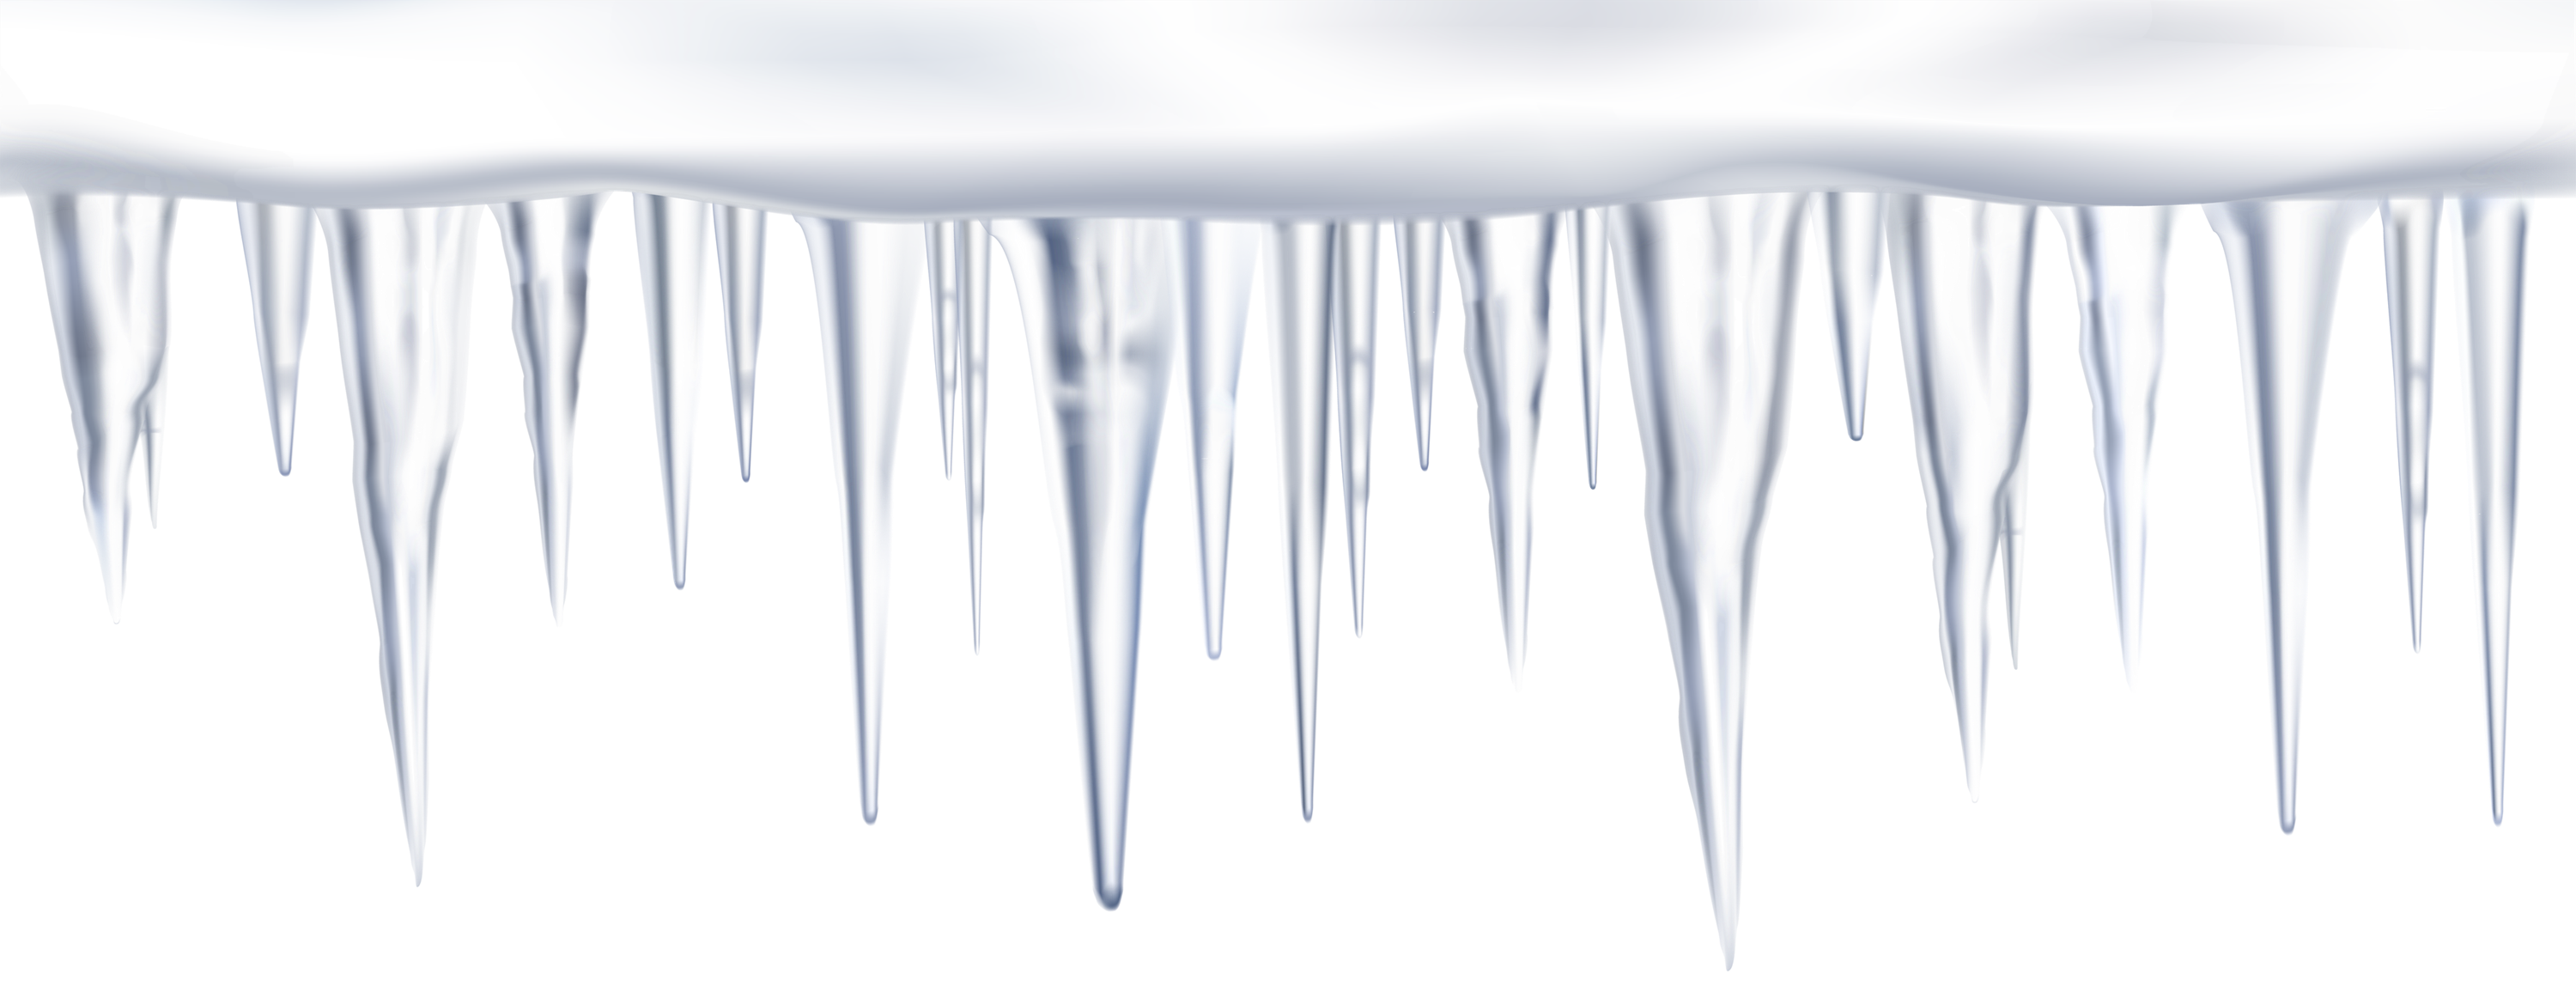 Icicles Download PNG Image